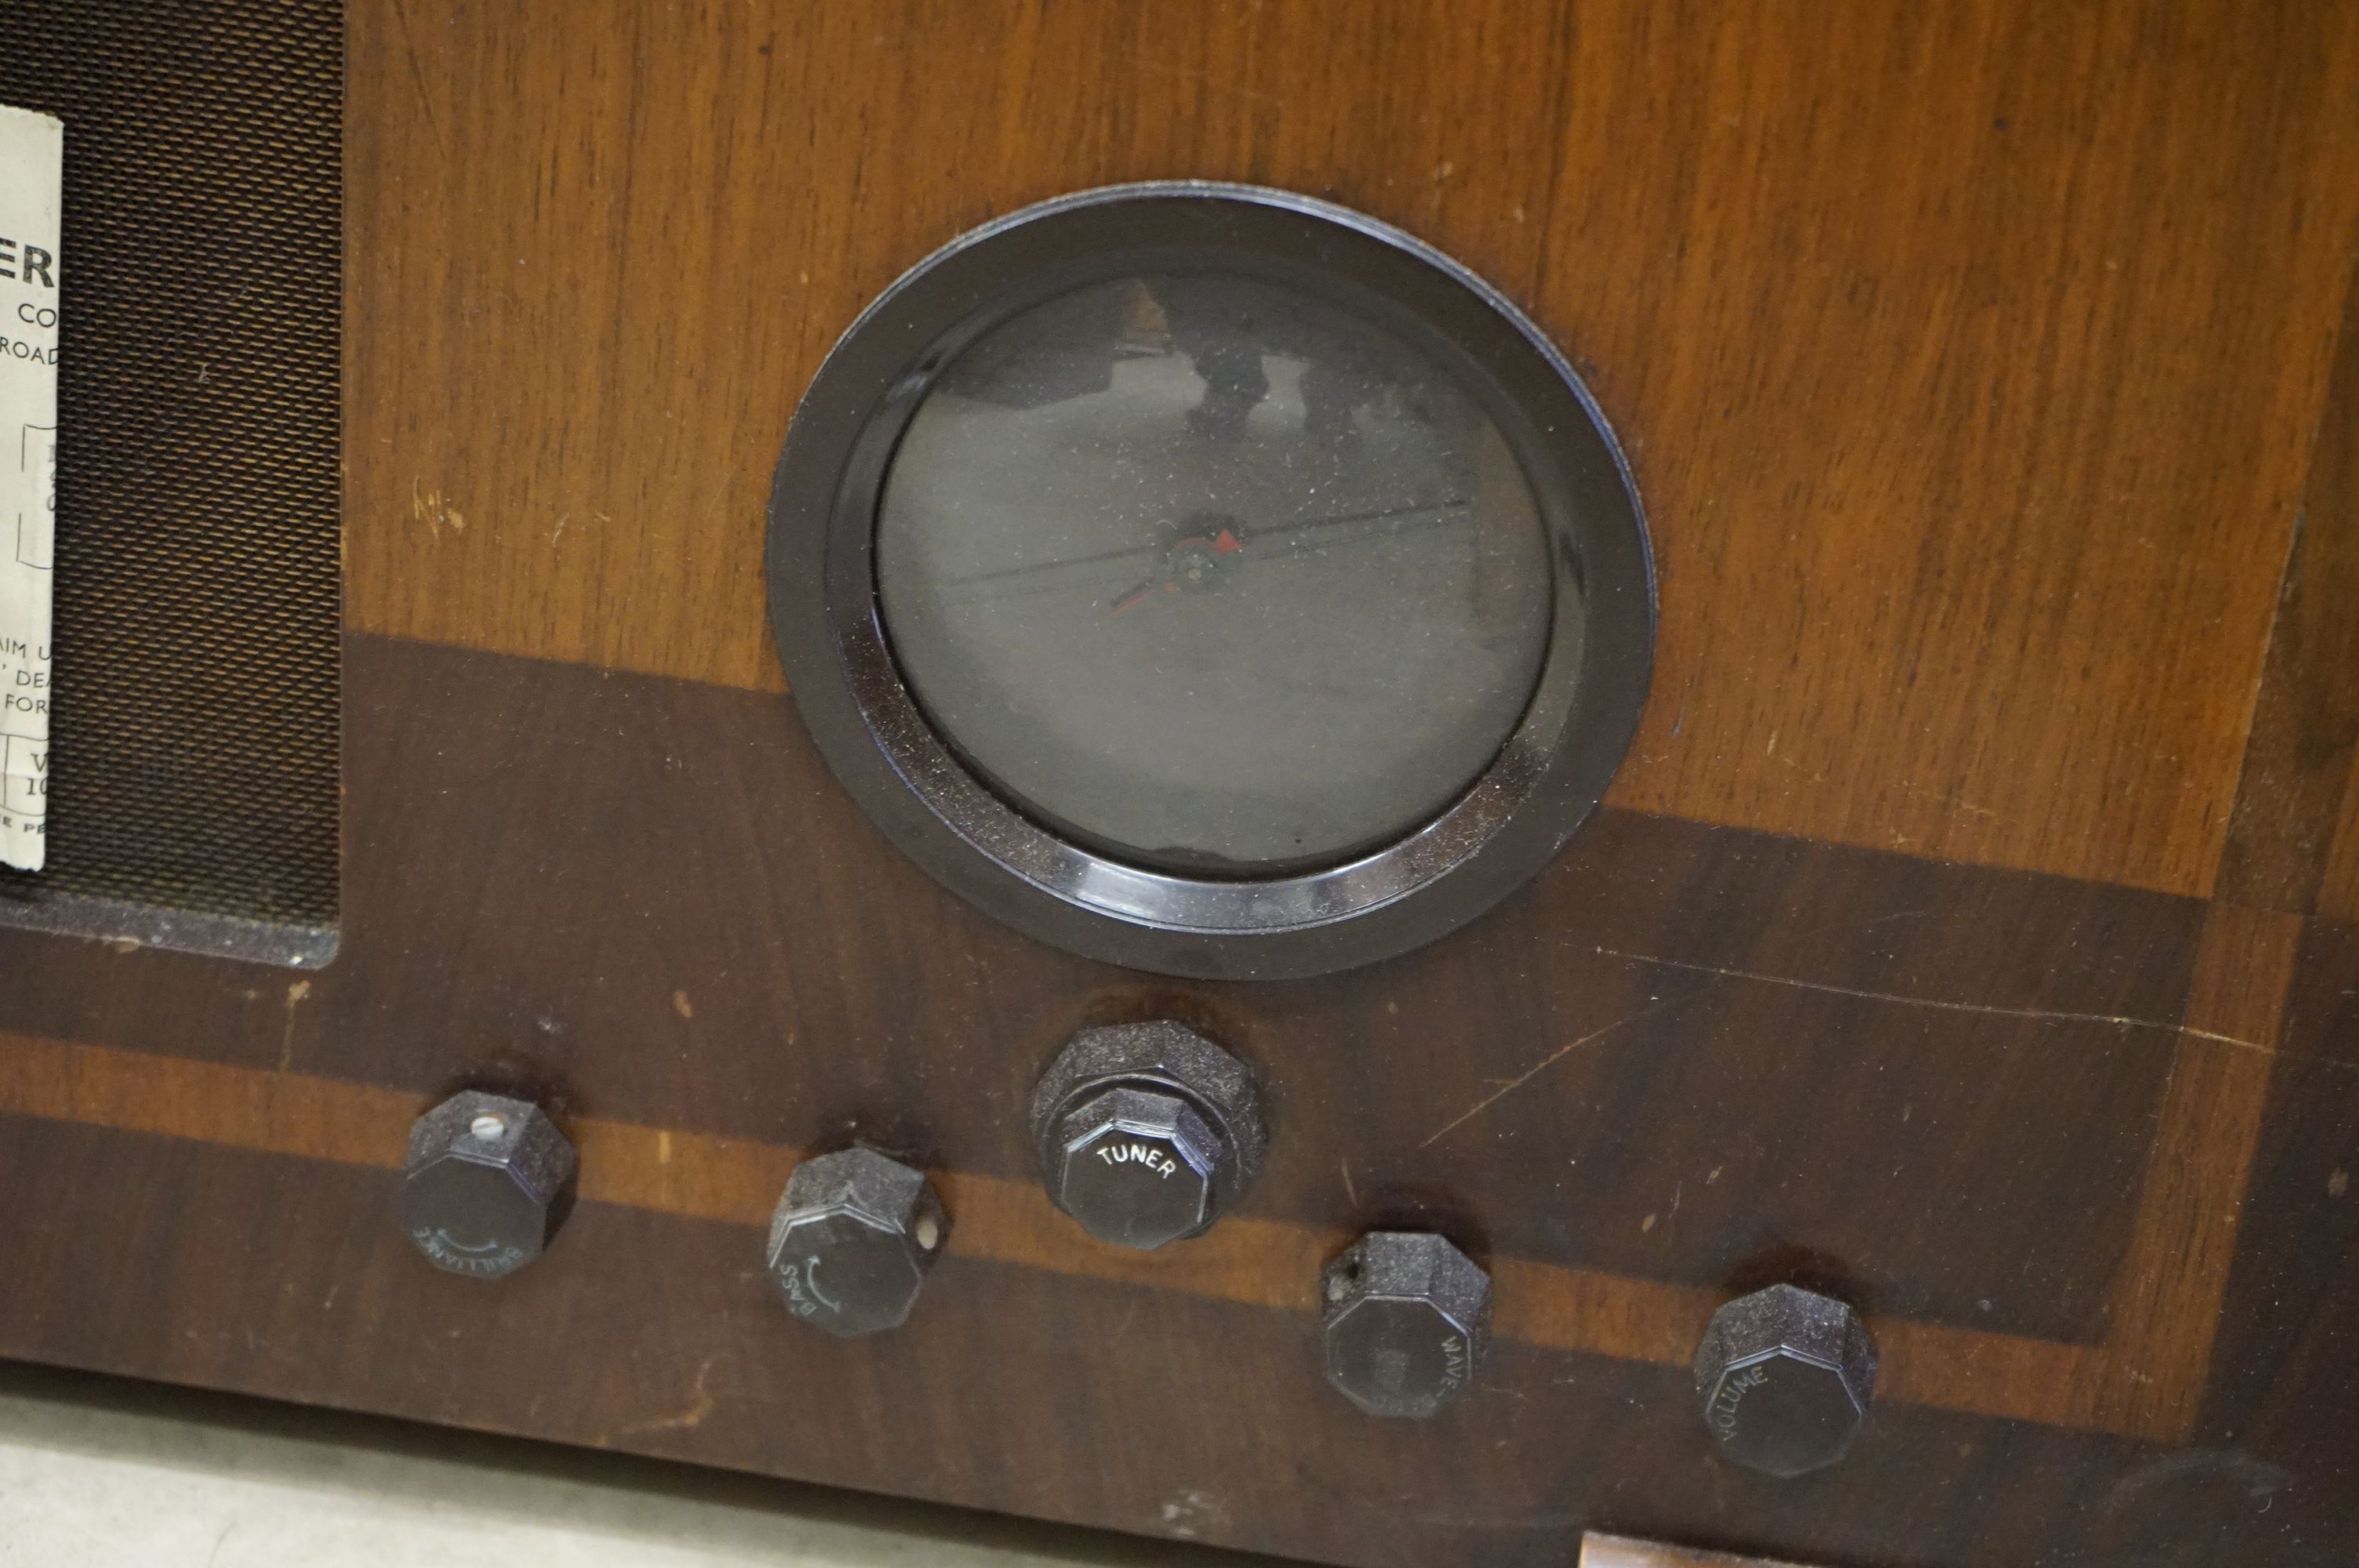 A vintage wooden cased HMV radio together with a wooden cased Monarch record player. - Image 2 of 8